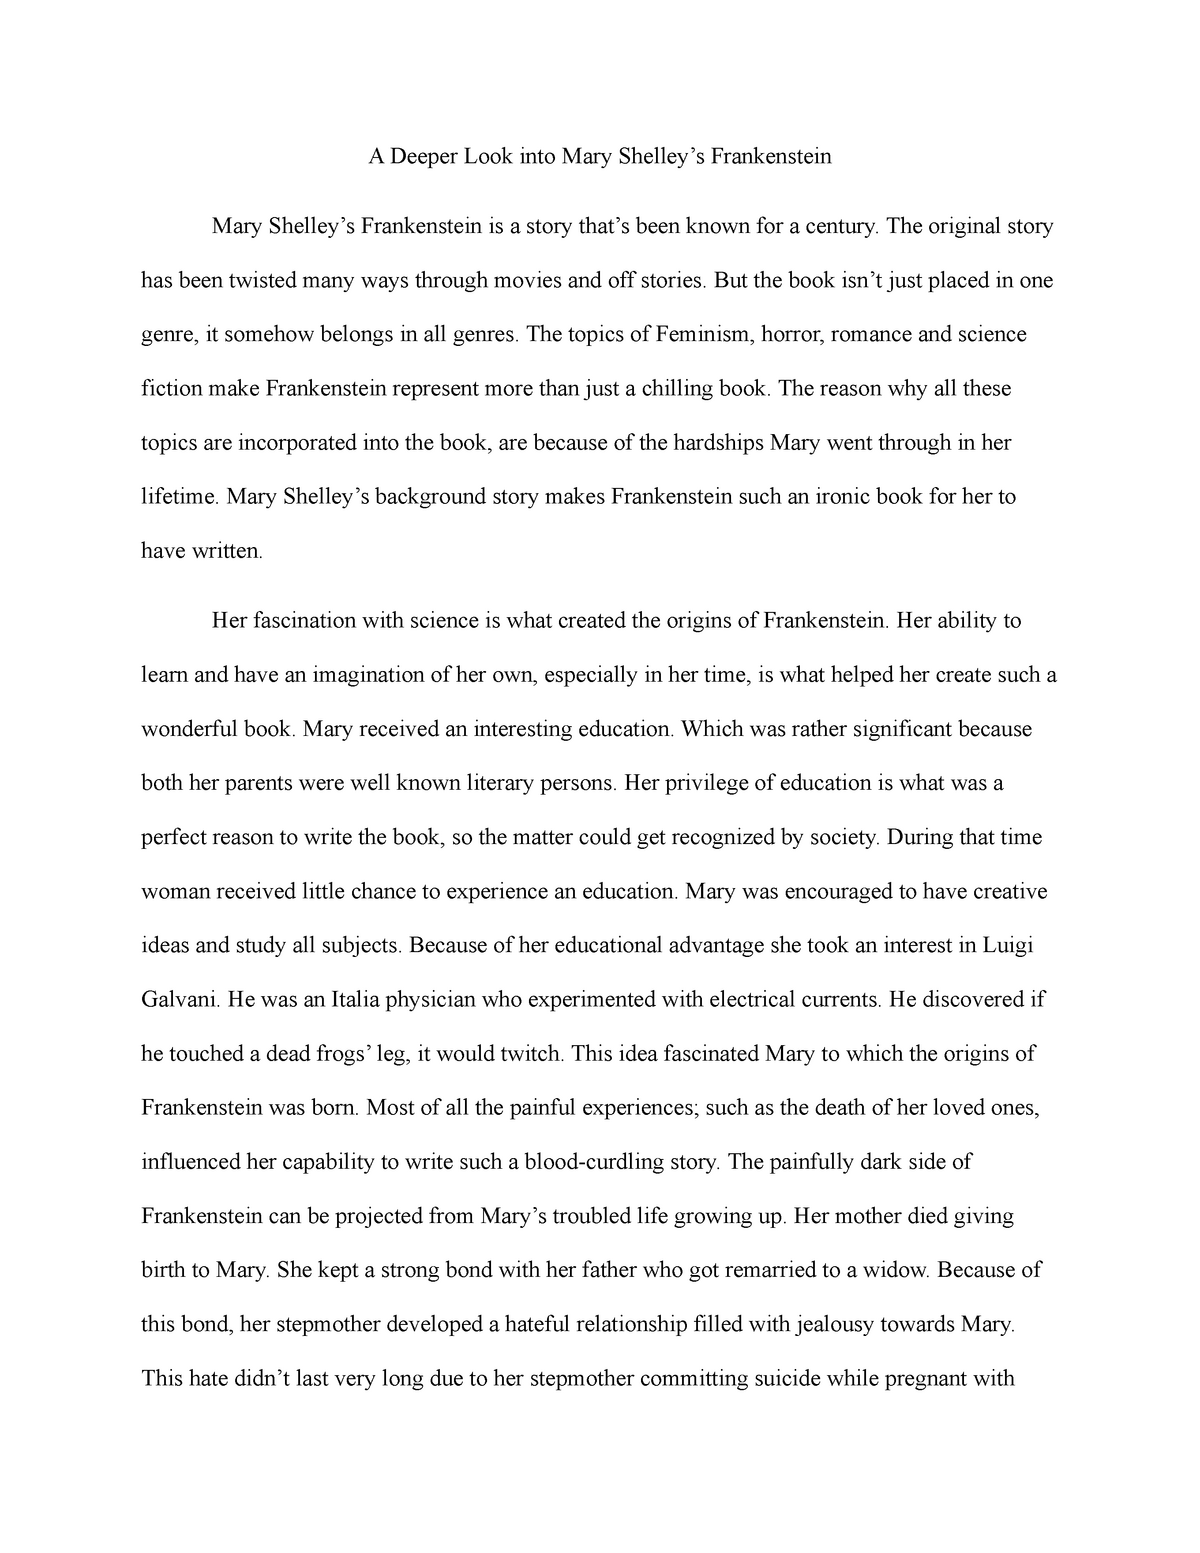 essay about frankenstein by mary shelley